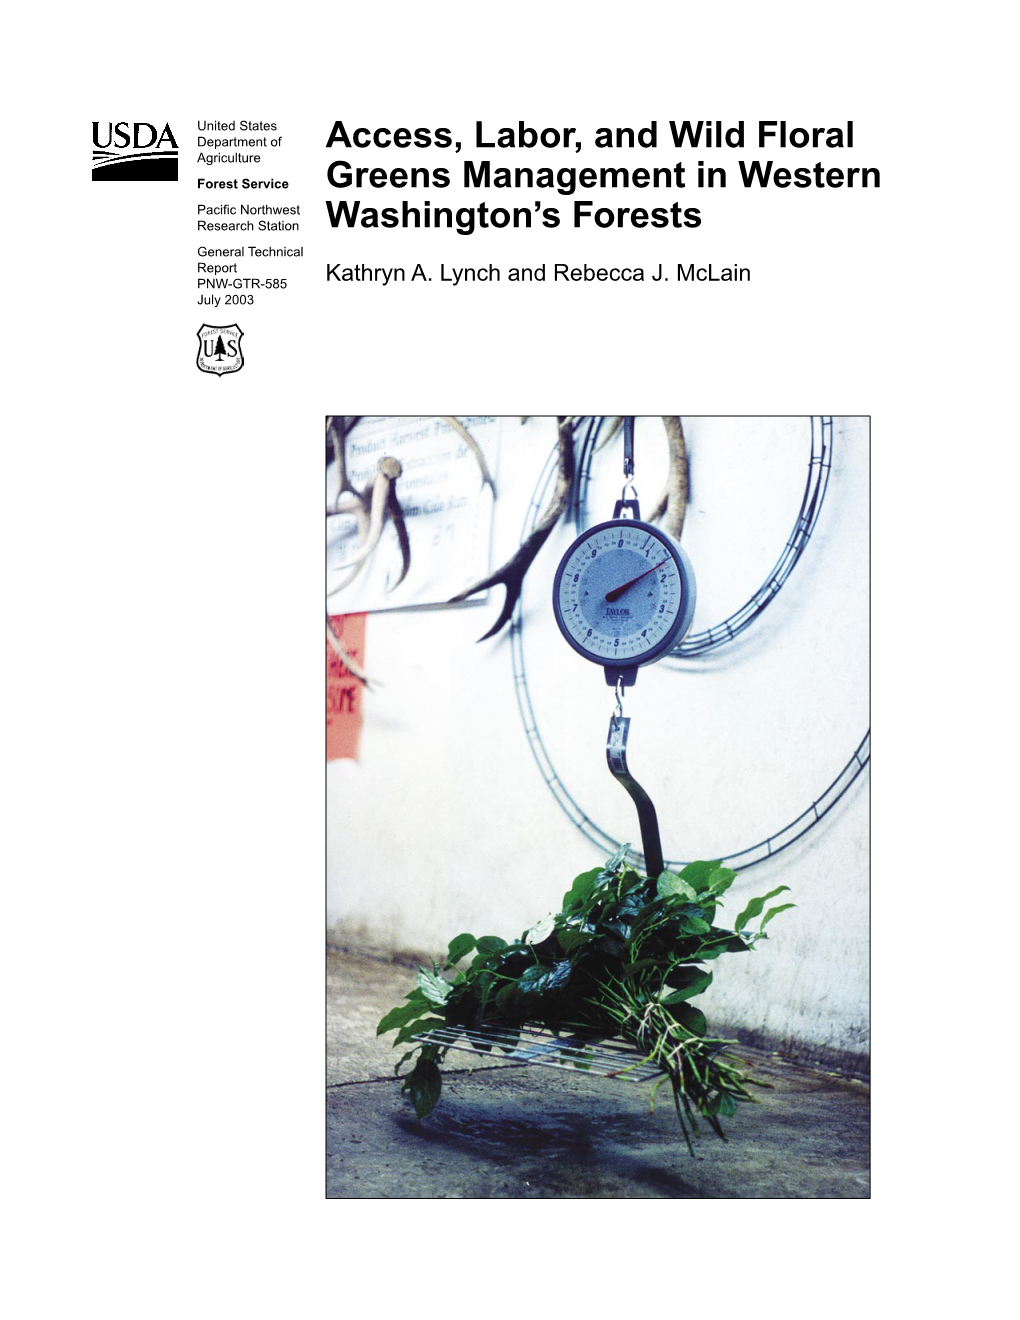 Access, Labor, and Wild Floral Greens Management in Western Washington's Forests